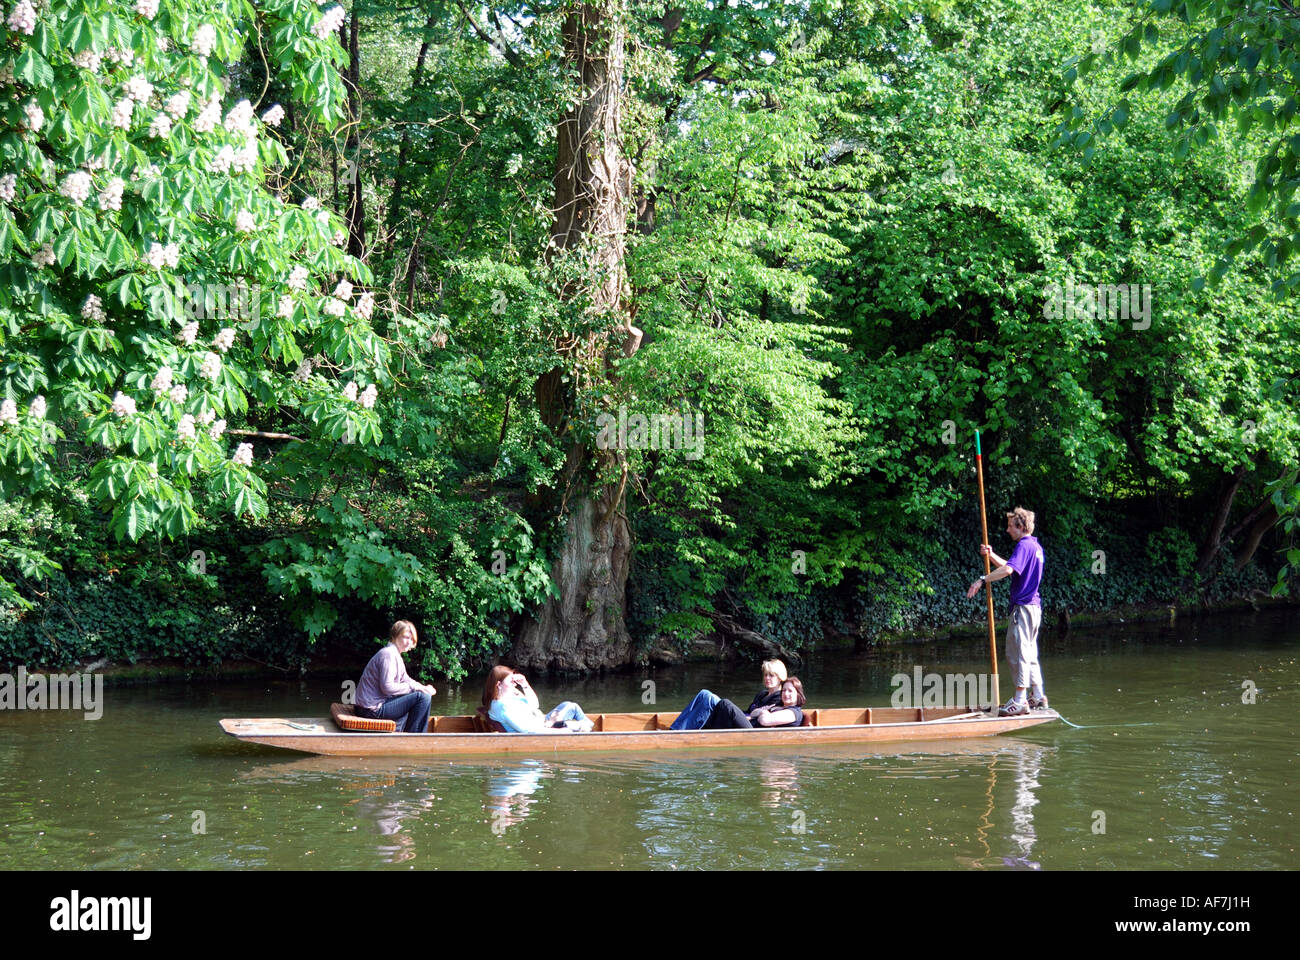 Students punting on River Cherwell, Oxford, Oxfordshire, England, United Kingdom Stock Photo